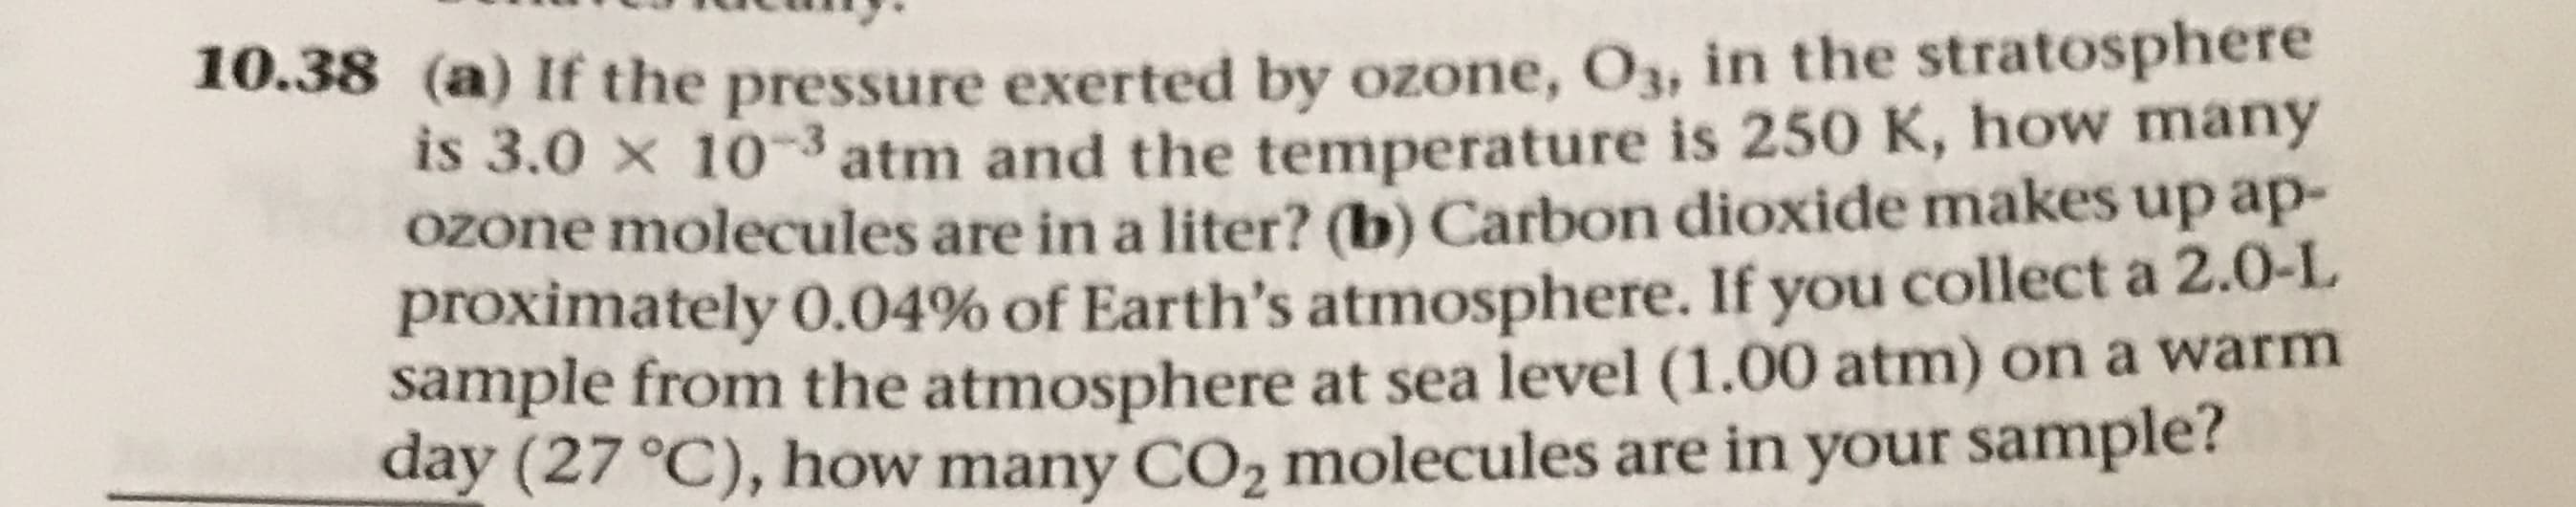 10.38 (a) If the pressure exerted by ozone, O3, in the stratosphere
IS 3.0 x 103atm and the temperature is 250 K, how many
OZone molecules are in a liter? (b) Carbon dioxide makes up ap-
proximately 0.04% of Earth's atmosphere. If you collect a 2.0-L
sample from the atmosphere at sea level (1.00 atm) on a warm
day (27 °C), how many CO2 molecules are in your sample?
